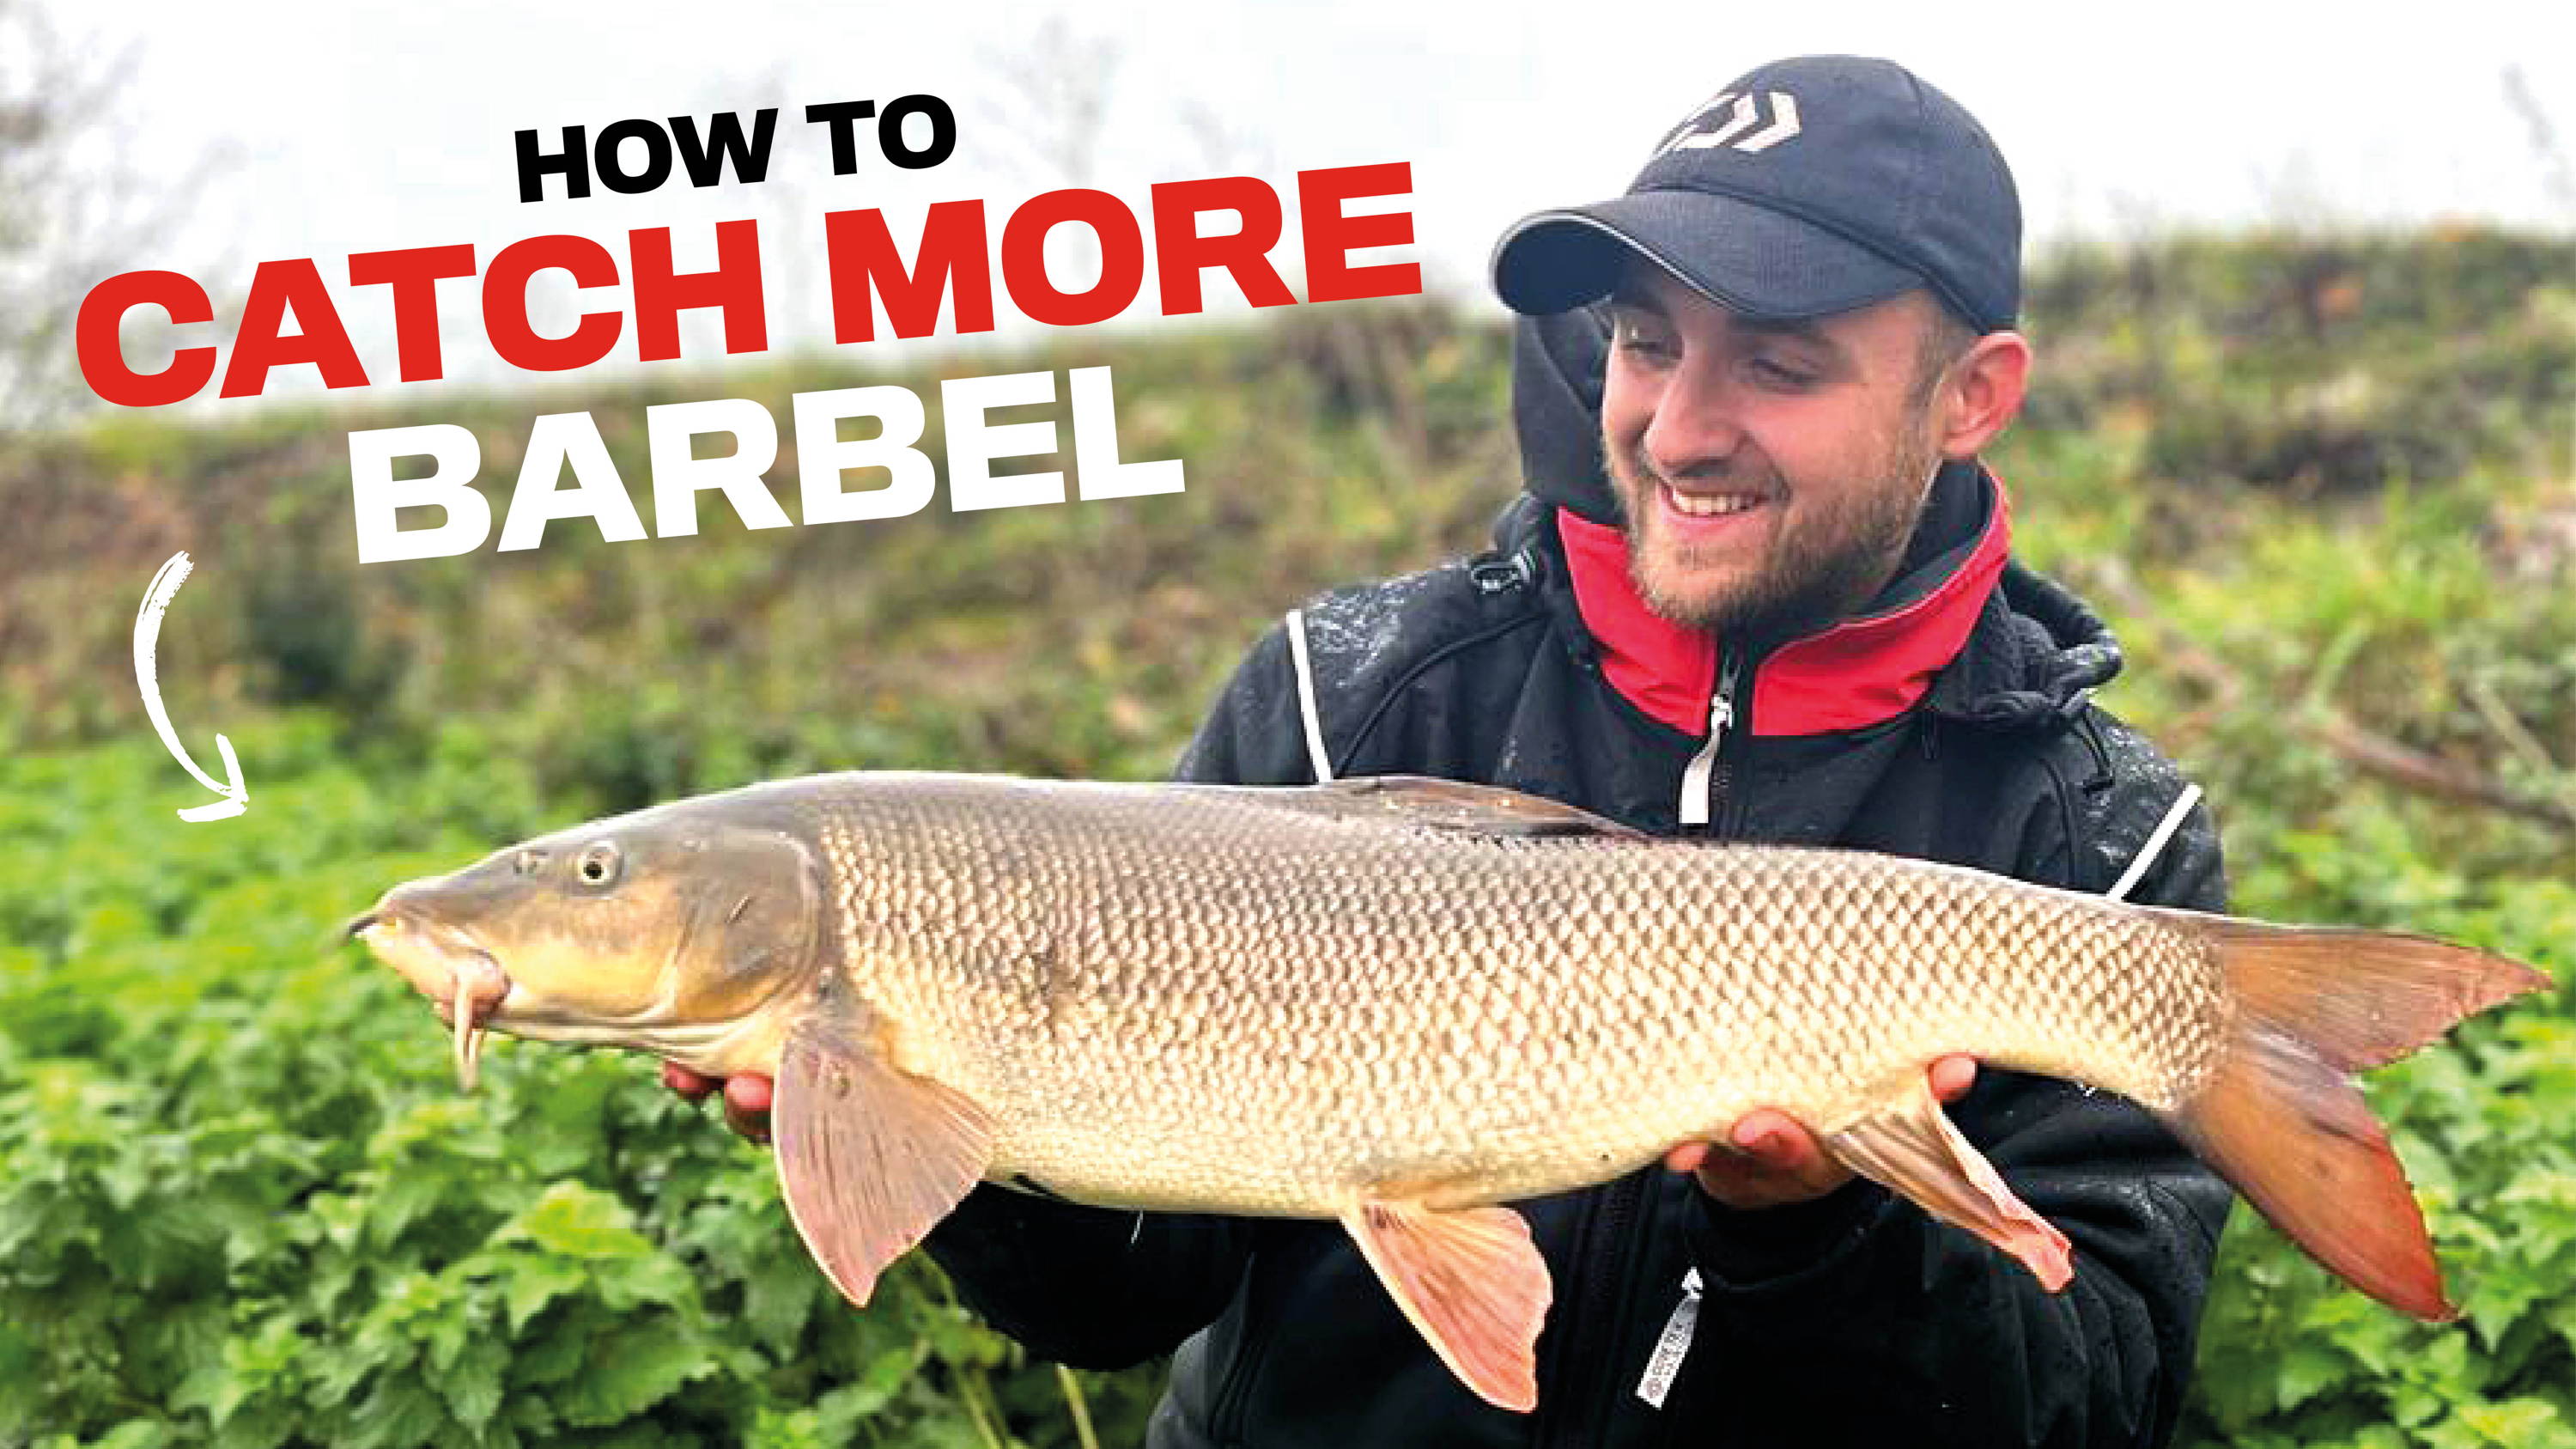 How To Catch Barbel? Ultimate Guide from River Record Holder